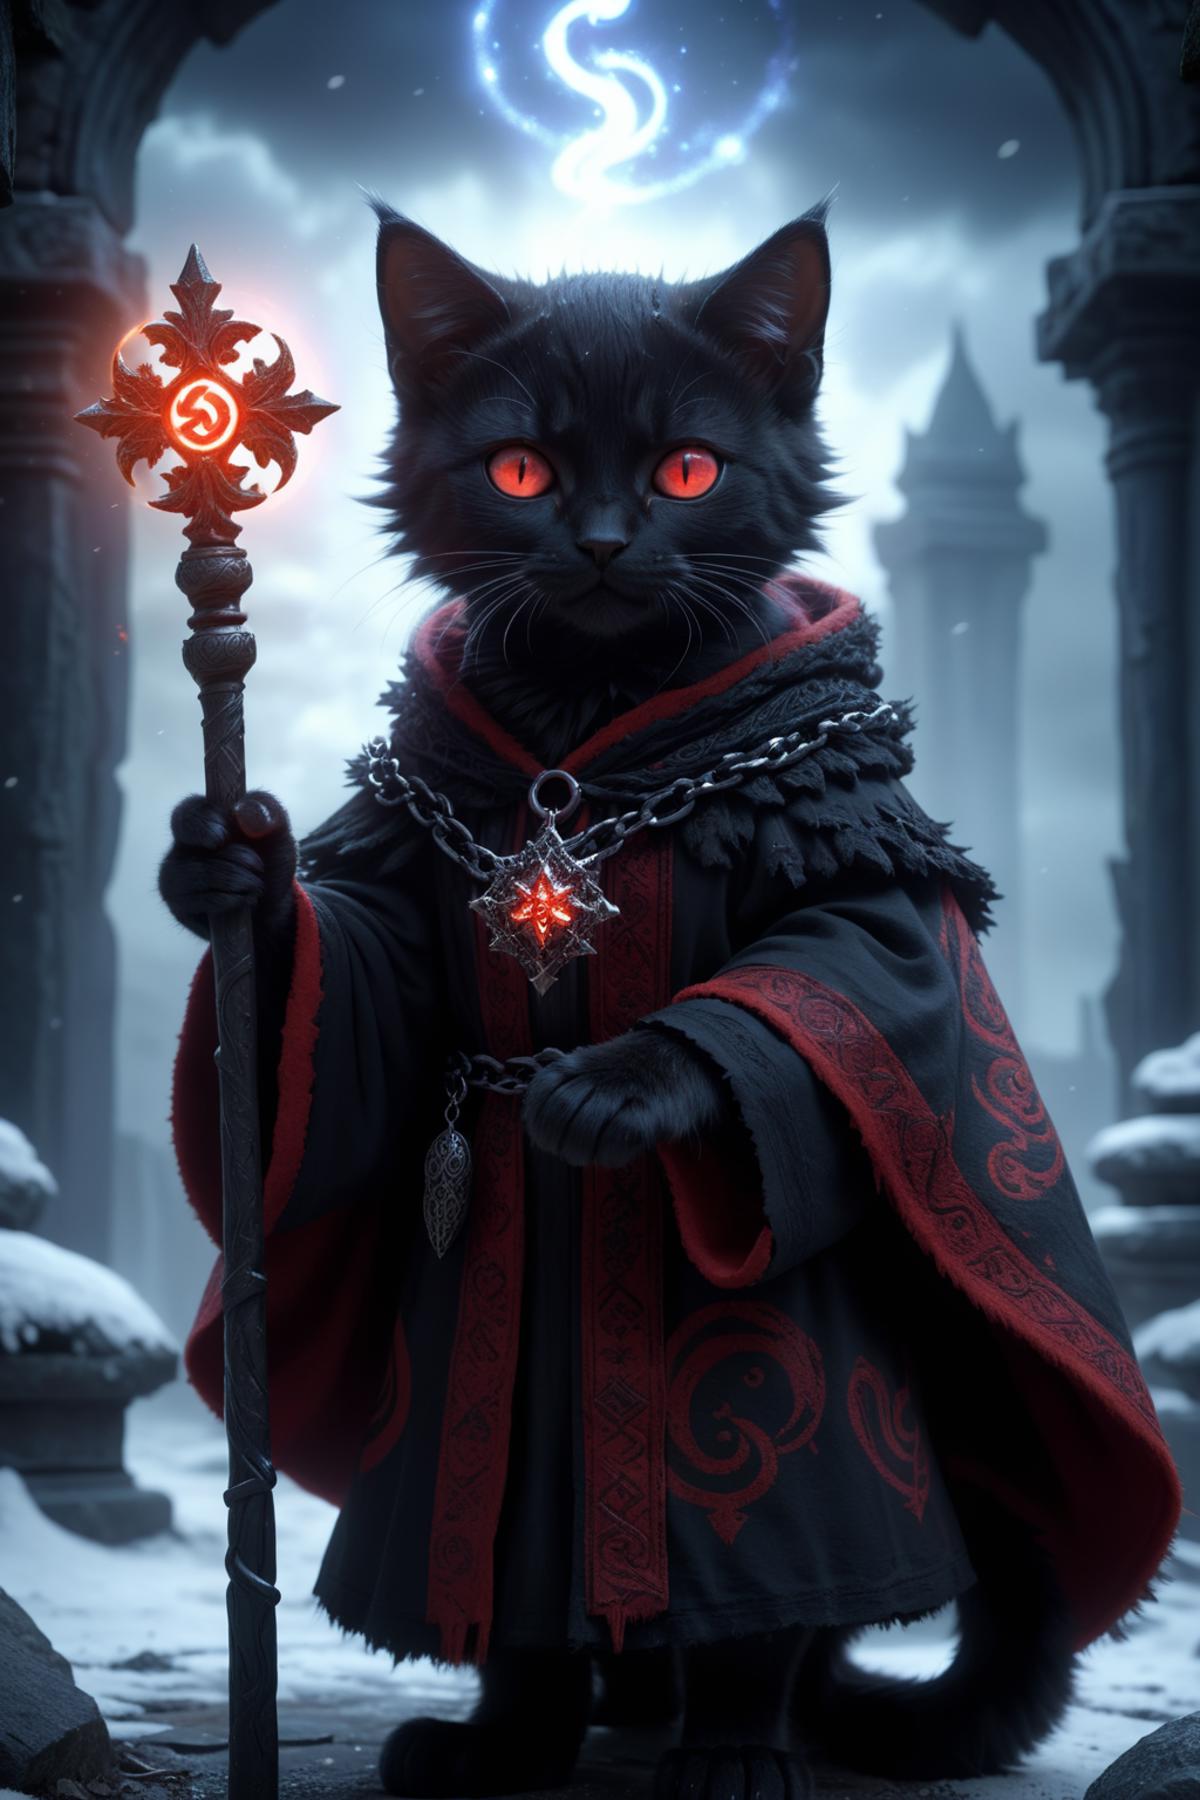 A black cat dressed as a wizard holding a wand in a snowy setting.